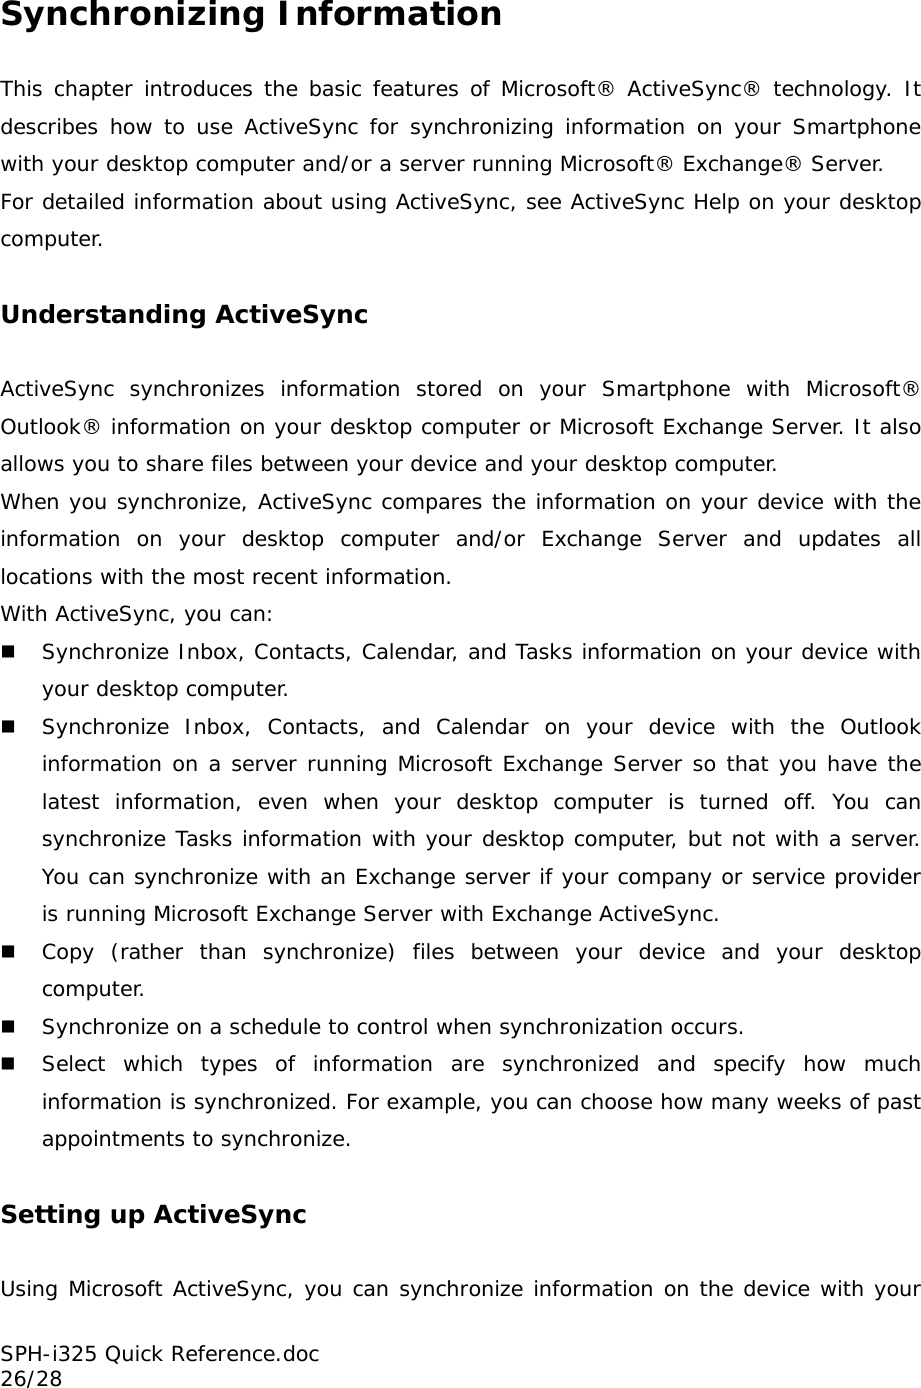 Synchronizing Information  This chapter introduces the basic features of Microsoft® ActiveSync® technology. It describes how to use ActiveSync for synchronizing information on your Smartphone with your desktop computer and/or a server running Microsoft® Exchange® Server.   For detailed information about using ActiveSync, see ActiveSync Help on your desktop computer.  Understanding ActiveSync  ActiveSync synchronizes information stored on your Smartphone with Microsoft® Outlook® information on your desktop computer or Microsoft Exchange Server. It also allows you to share files between your device and your desktop computer. When you synchronize, ActiveSync compares the information on your device with the information on your desktop computer and/or Exchange Server and updates all locations with the most recent information.  With ActiveSync, you can:  Synchronize Inbox, Contacts, Calendar, and Tasks information on your device with your desktop computer.  Synchronize Inbox, Contacts, and Calendar on your device with the Outlook information on a server running Microsoft Exchange Server so that you have the latest information, even when your desktop computer is turned off. You can synchronize Tasks information with your desktop computer, but not with a server. You can synchronize with an Exchange server if your company or service provider is running Microsoft Exchange Server with Exchange ActiveSync.  Copy (rather than synchronize) files between your device and your desktop computer.  Synchronize on a schedule to control when synchronization occurs.  Select which types of information are synchronized and specify how much information is synchronized. For example, you can choose how many weeks of past appointments to synchronize.  Setting up ActiveSync  Using Microsoft ActiveSync, you can synchronize information on the device with your SPH-i325 Quick Reference.doc                                                          26/28 